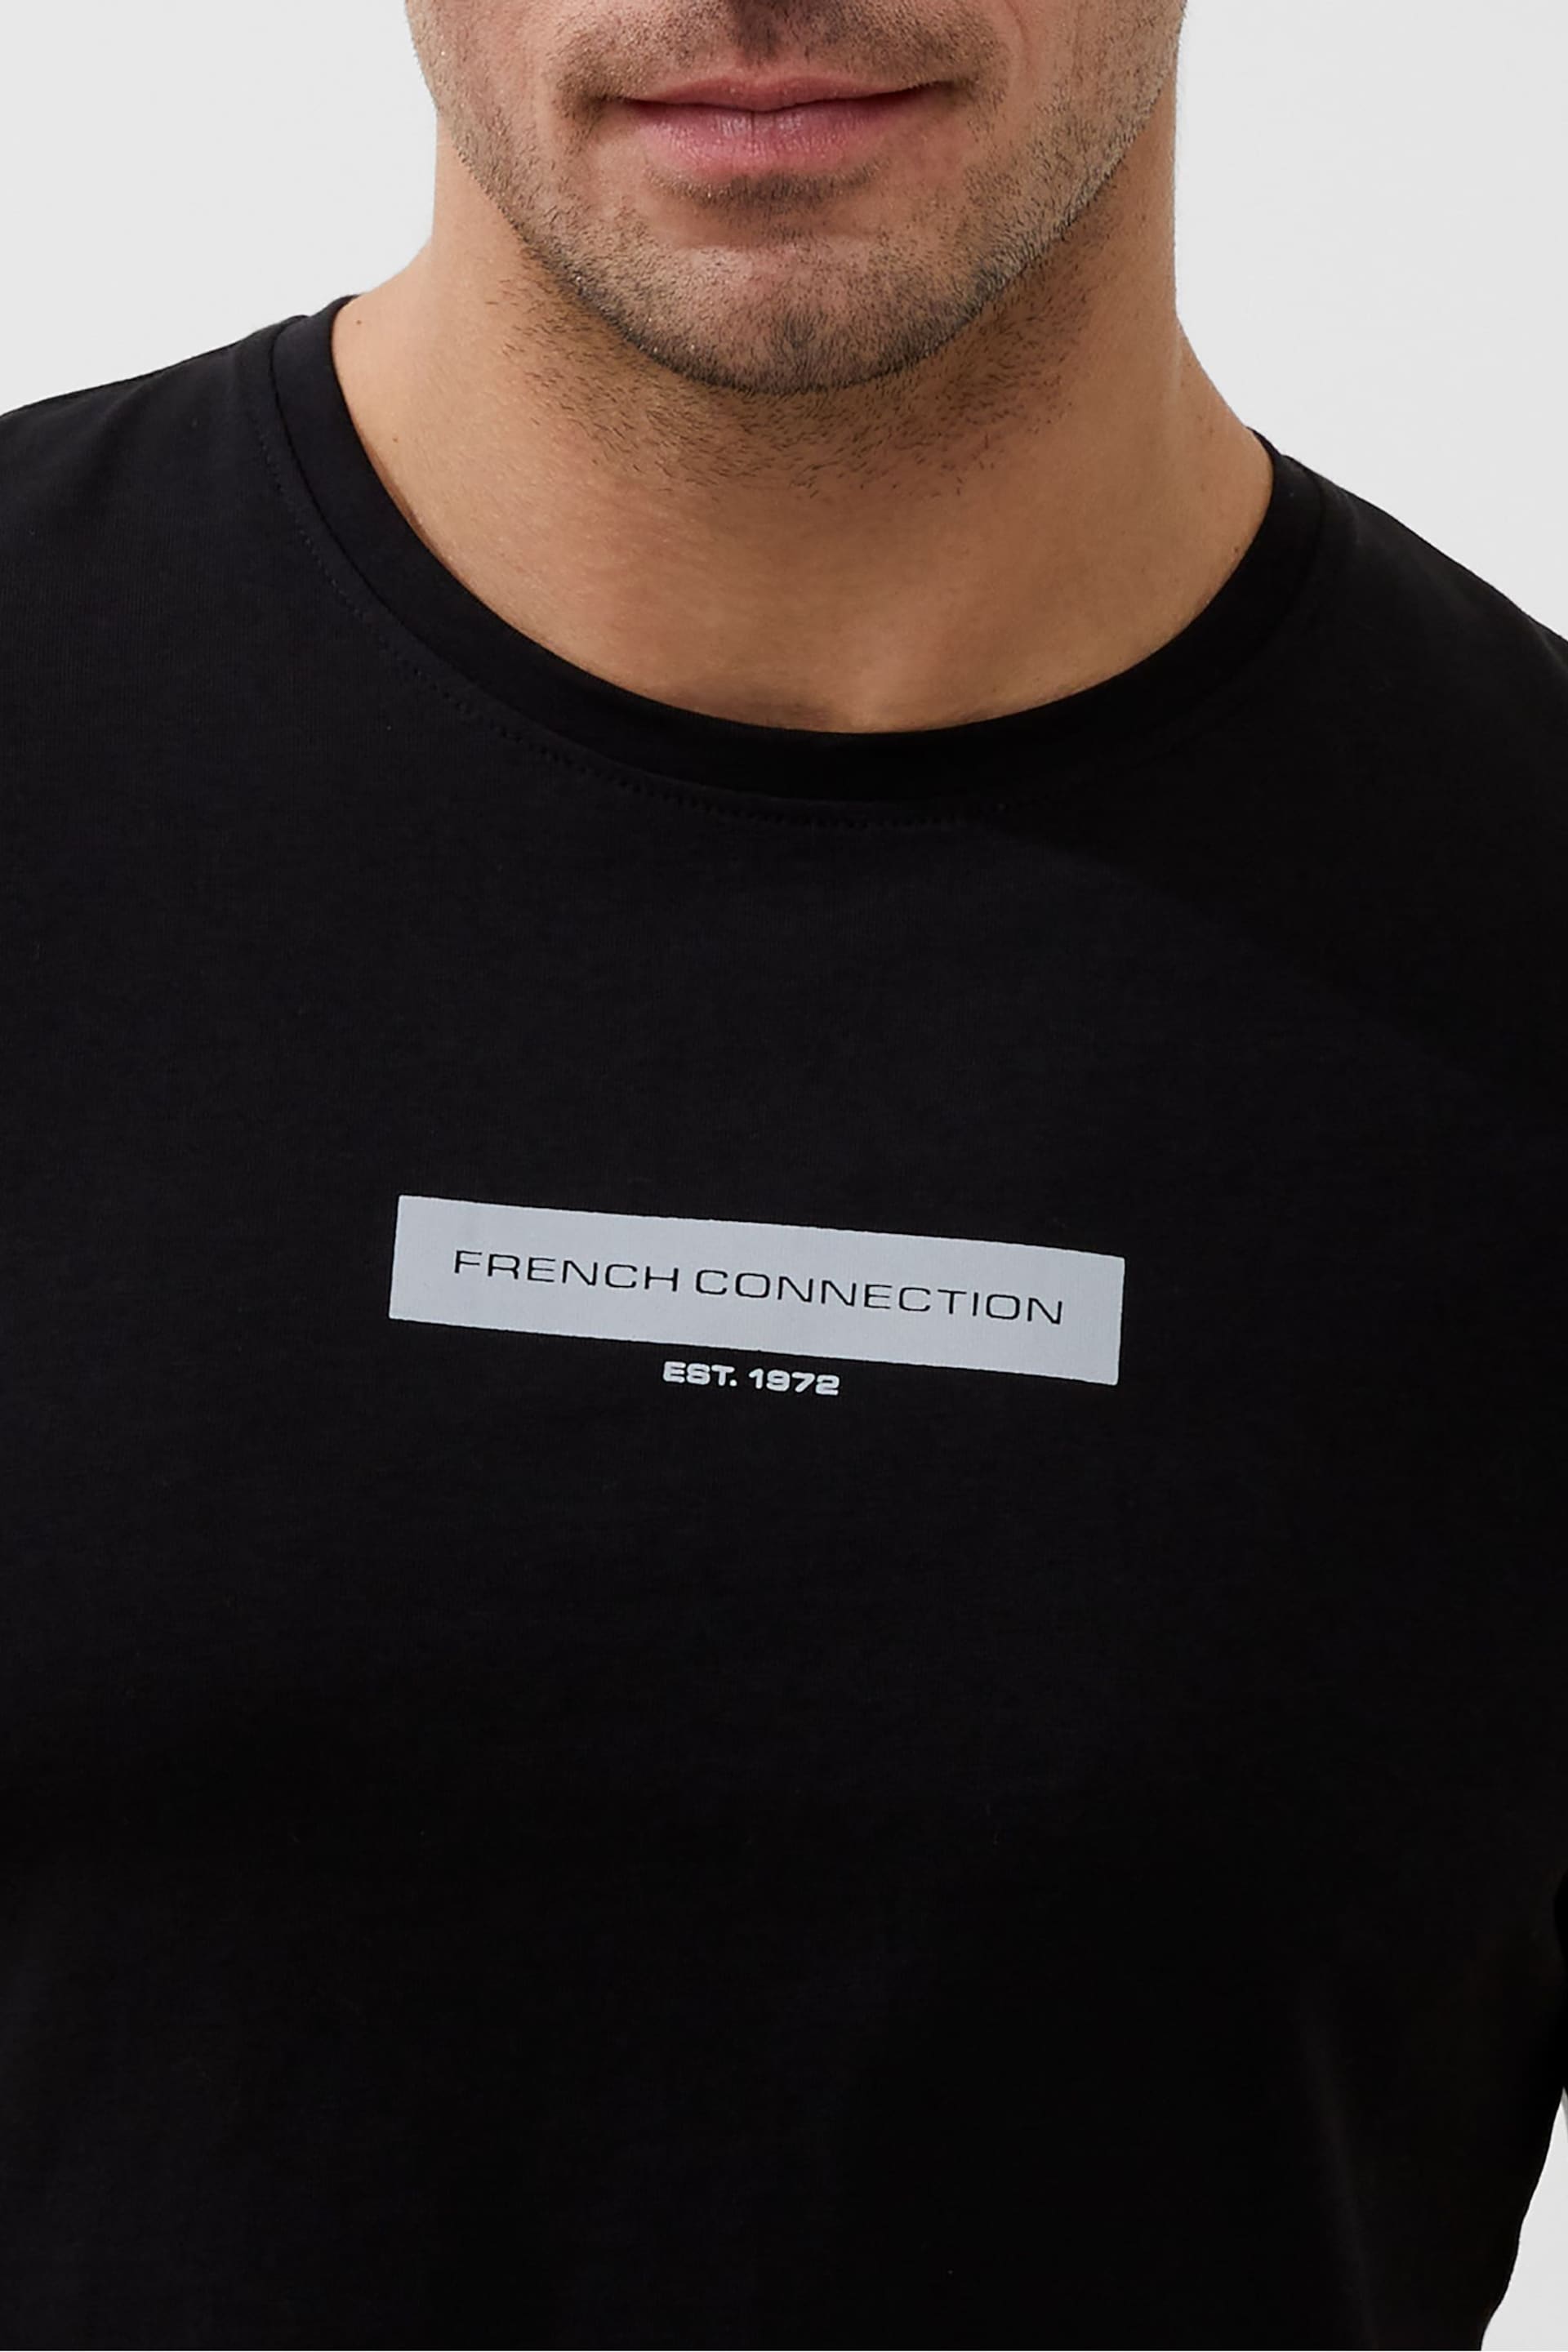 French Connection Organic Box Logo Graphic Black T-Shirt - Image 3 of 3